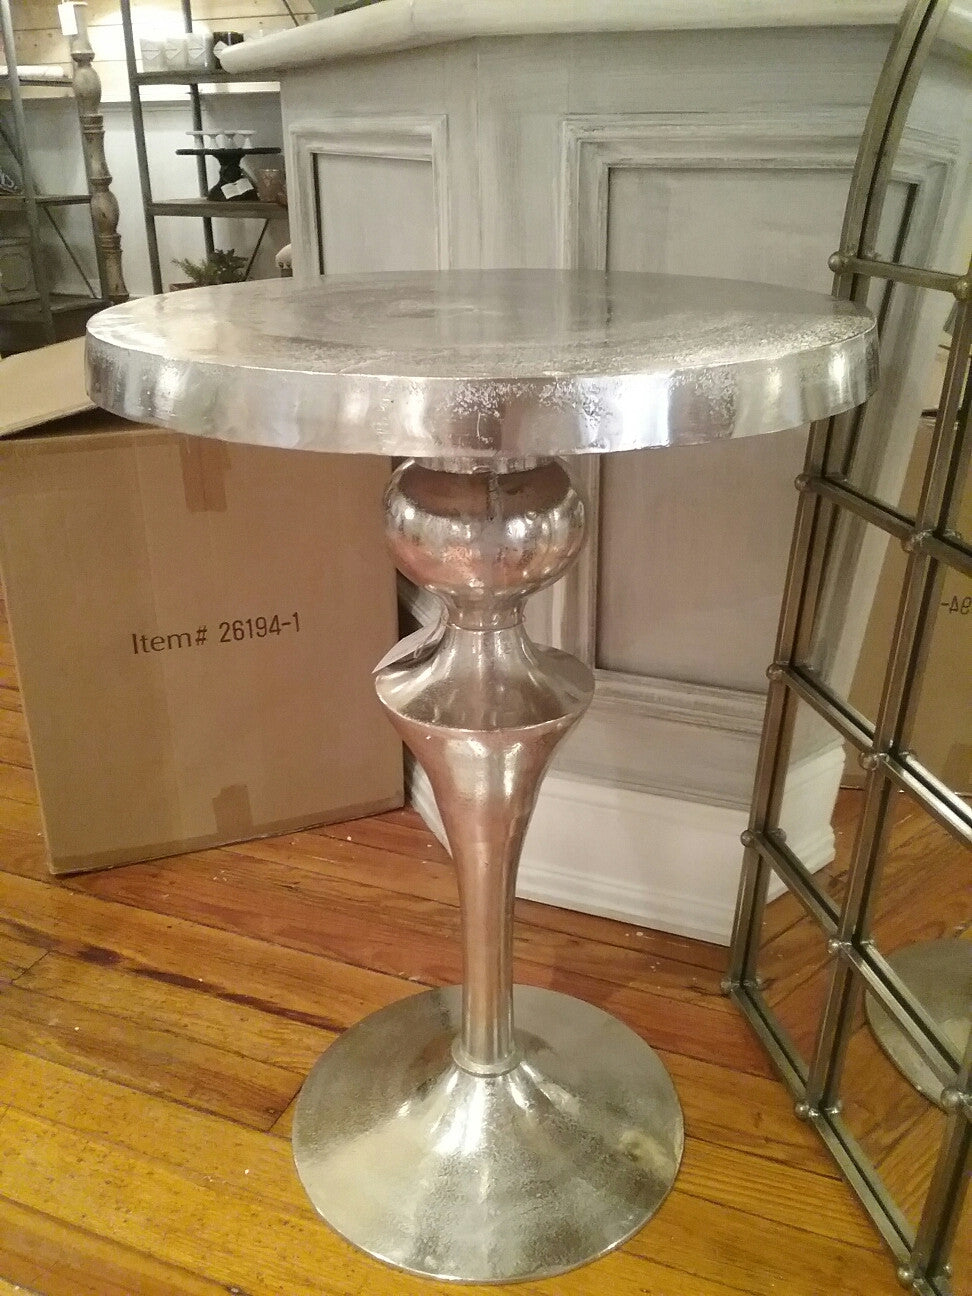 Nathan Accent Table